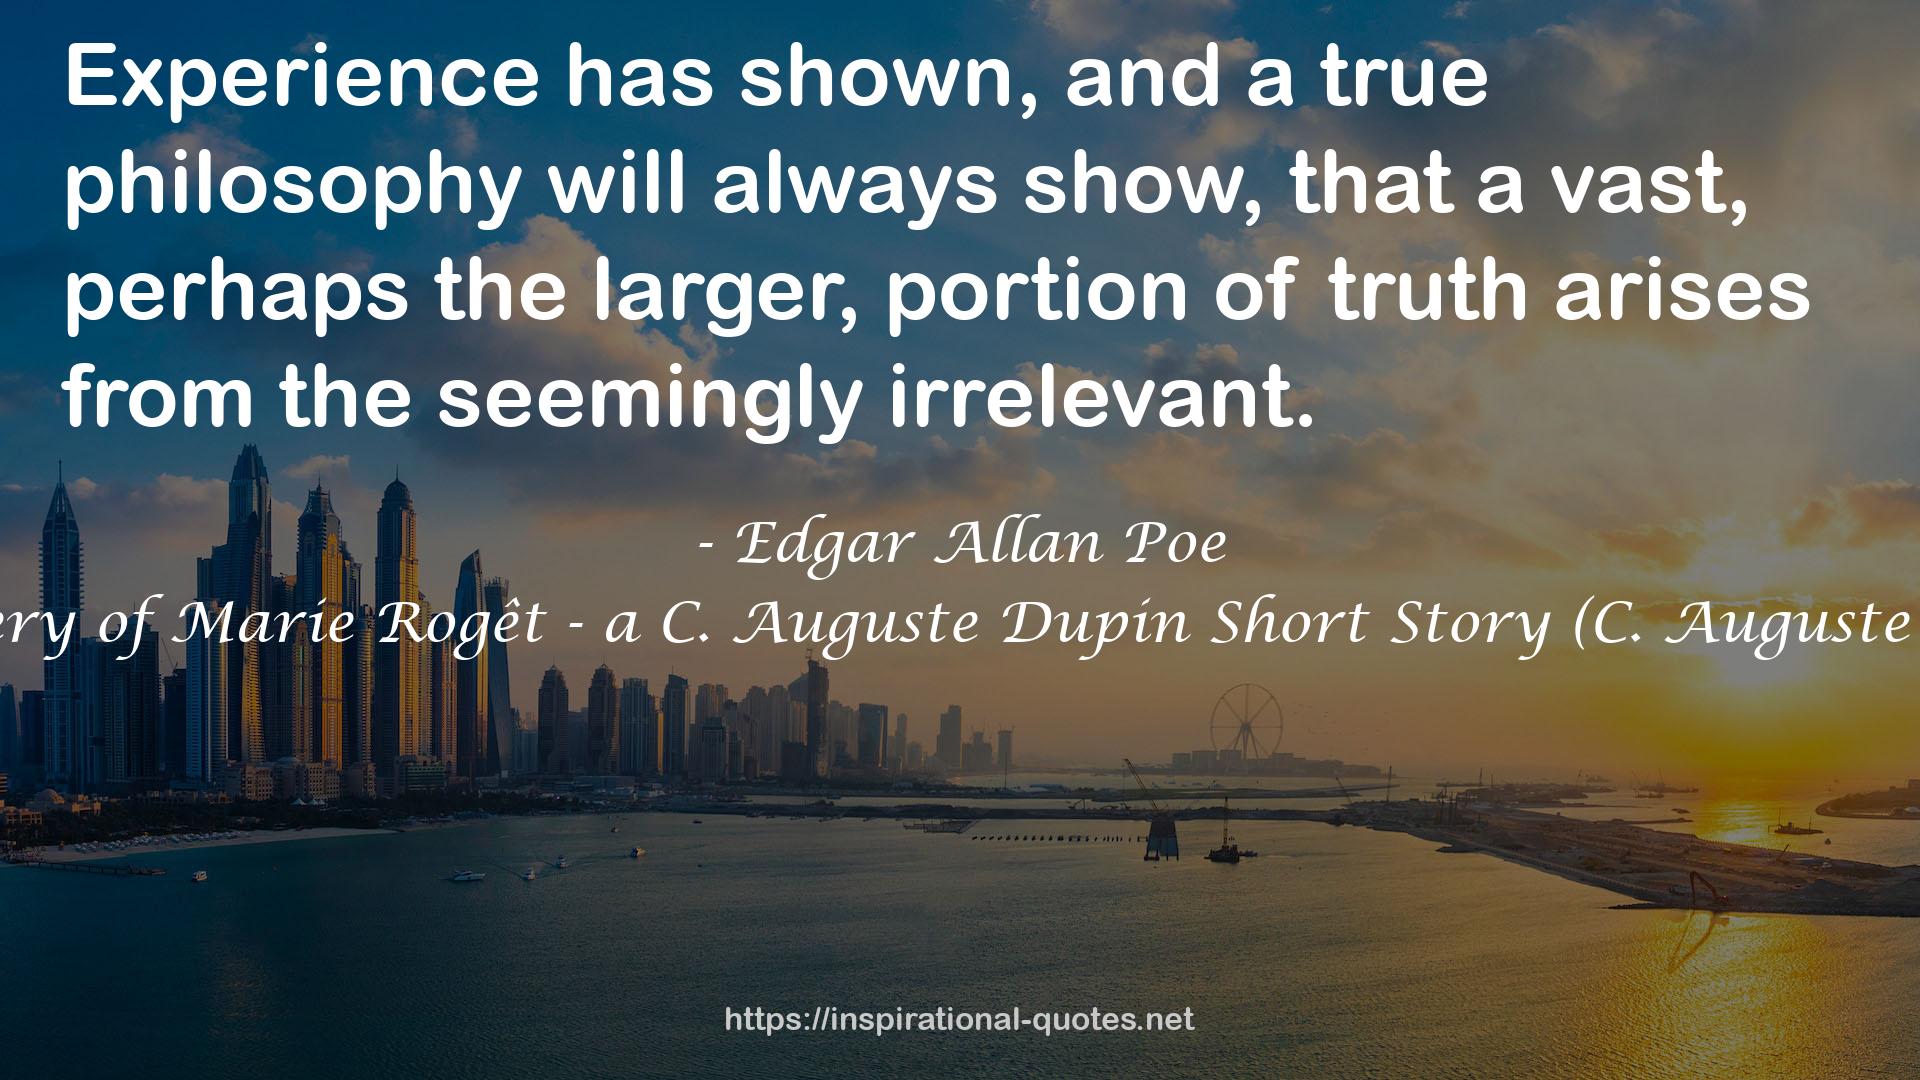 The Mystery of Marie Rogêt - a C. Auguste Dupin Short Story (C. Auguste Dupin #2) QUOTES